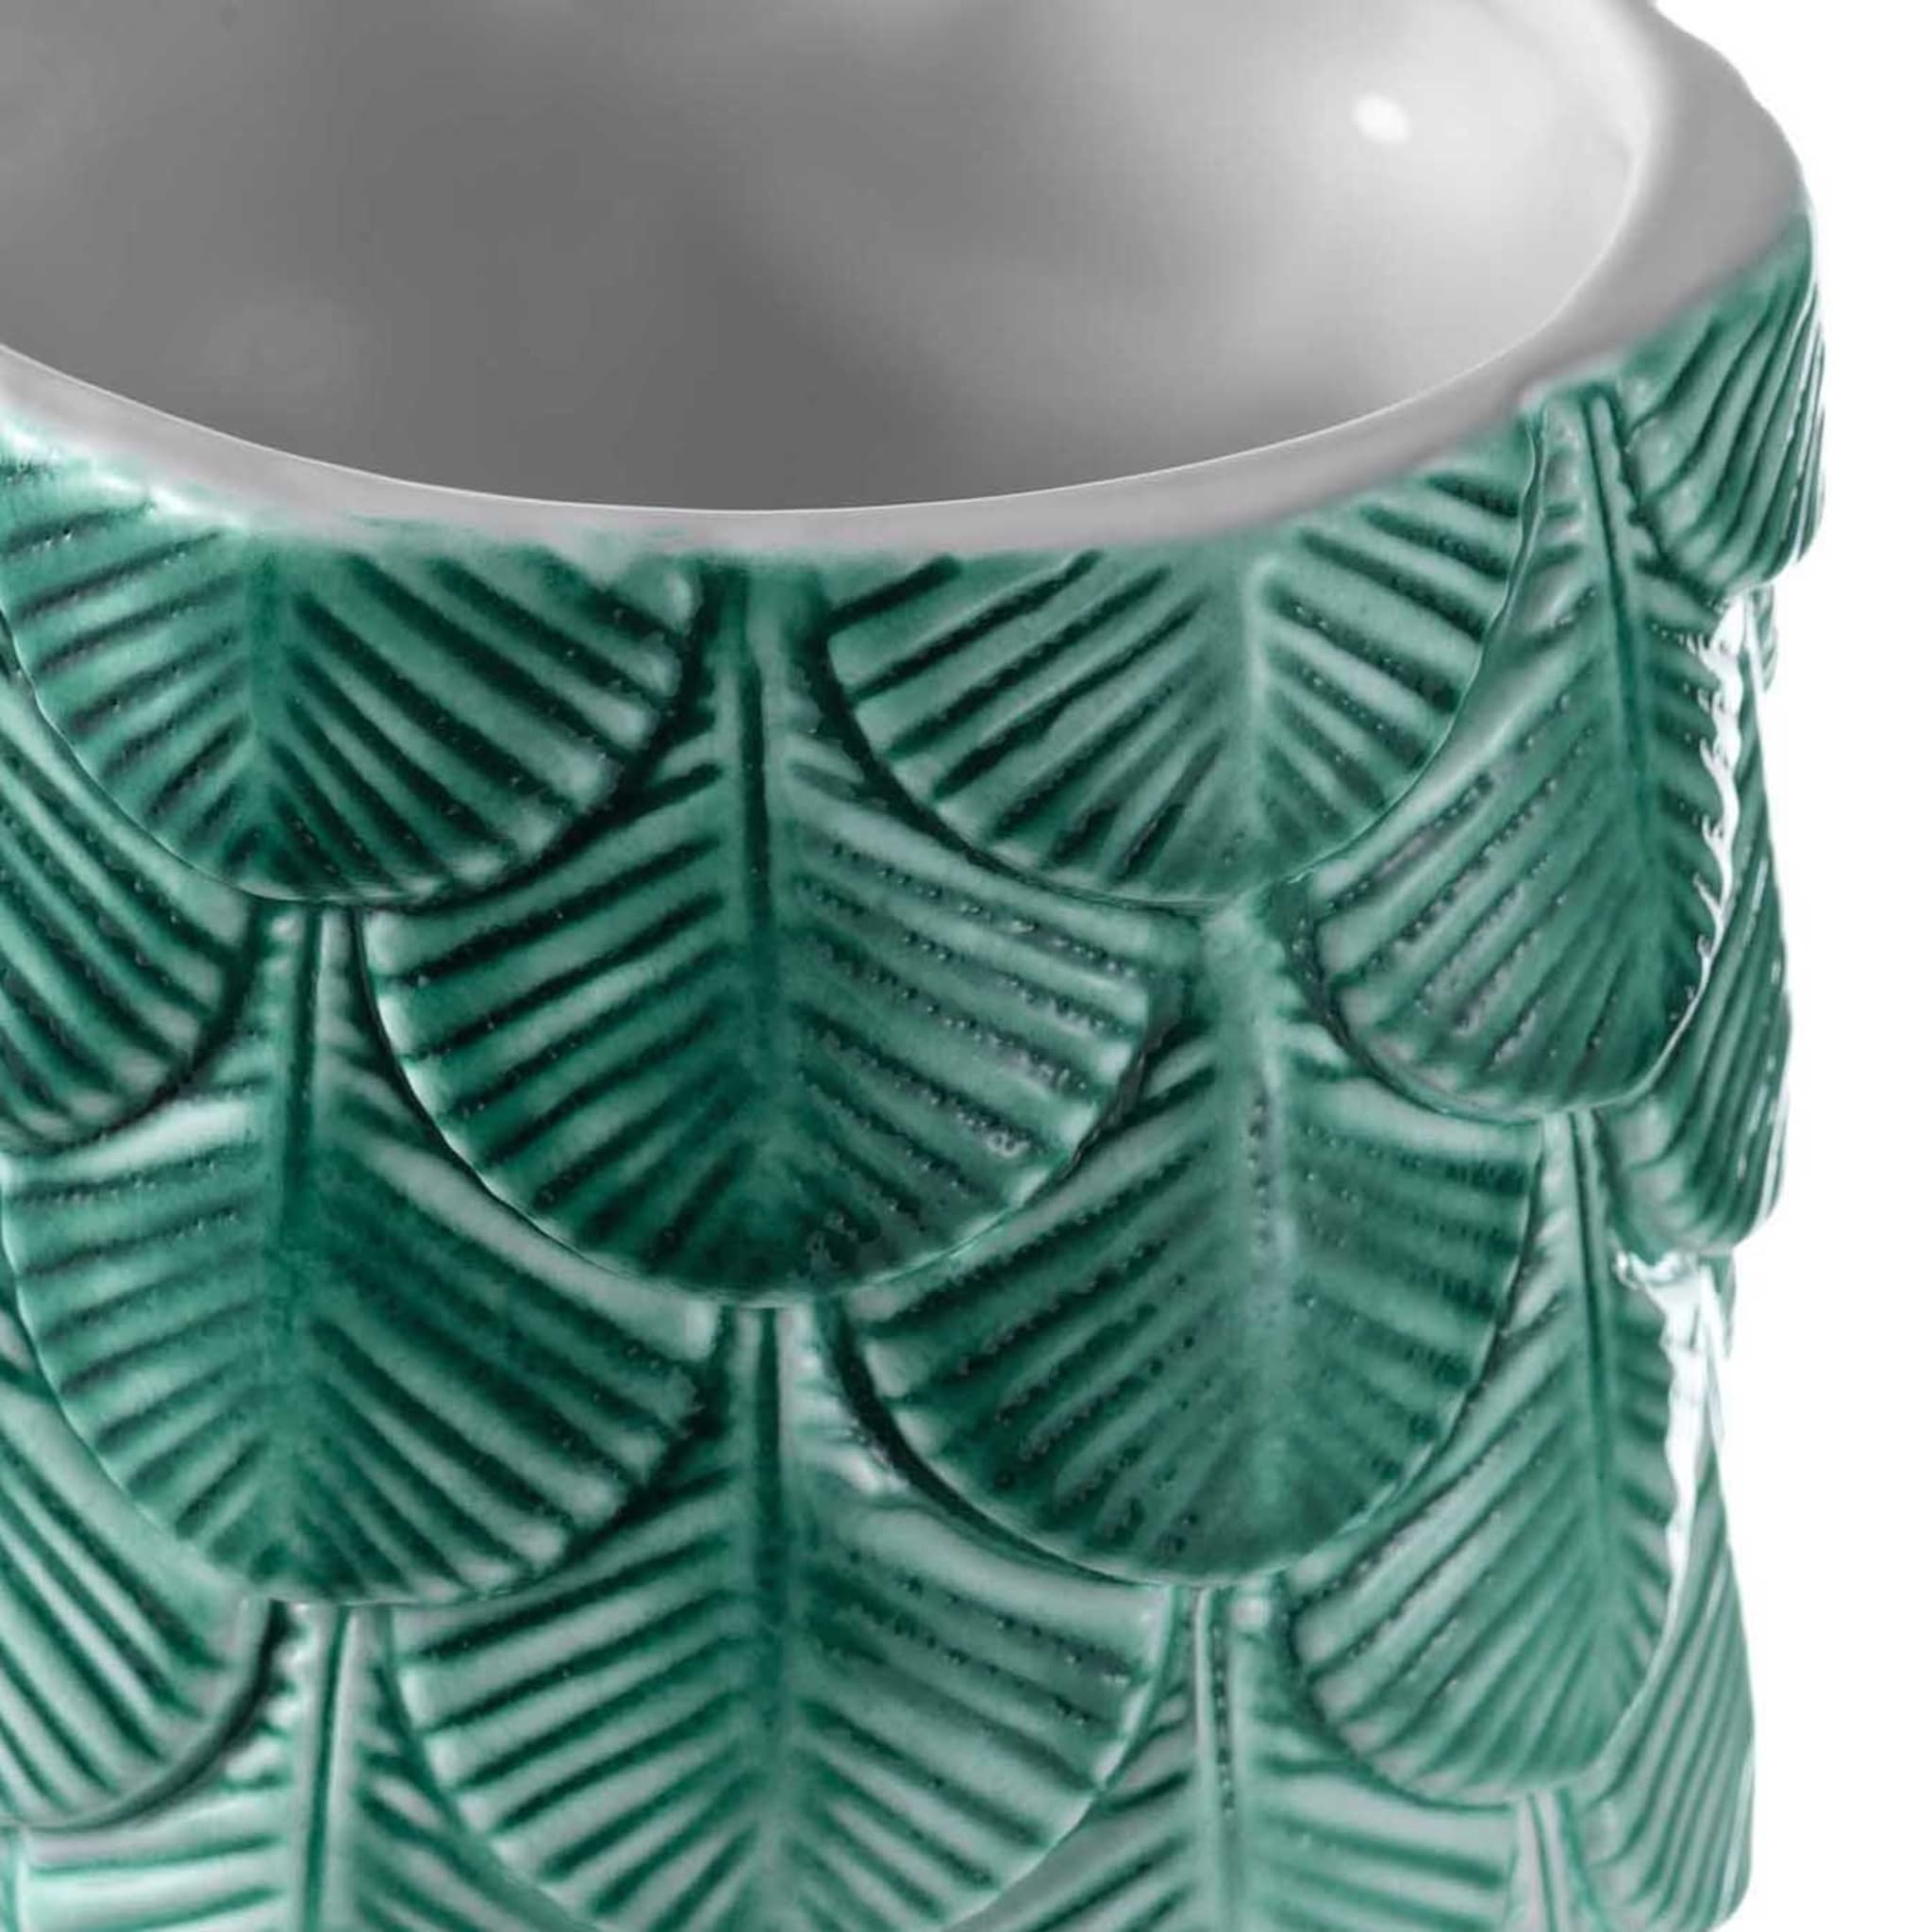 Turquoise and White Plumage Vase - Alternative view 1